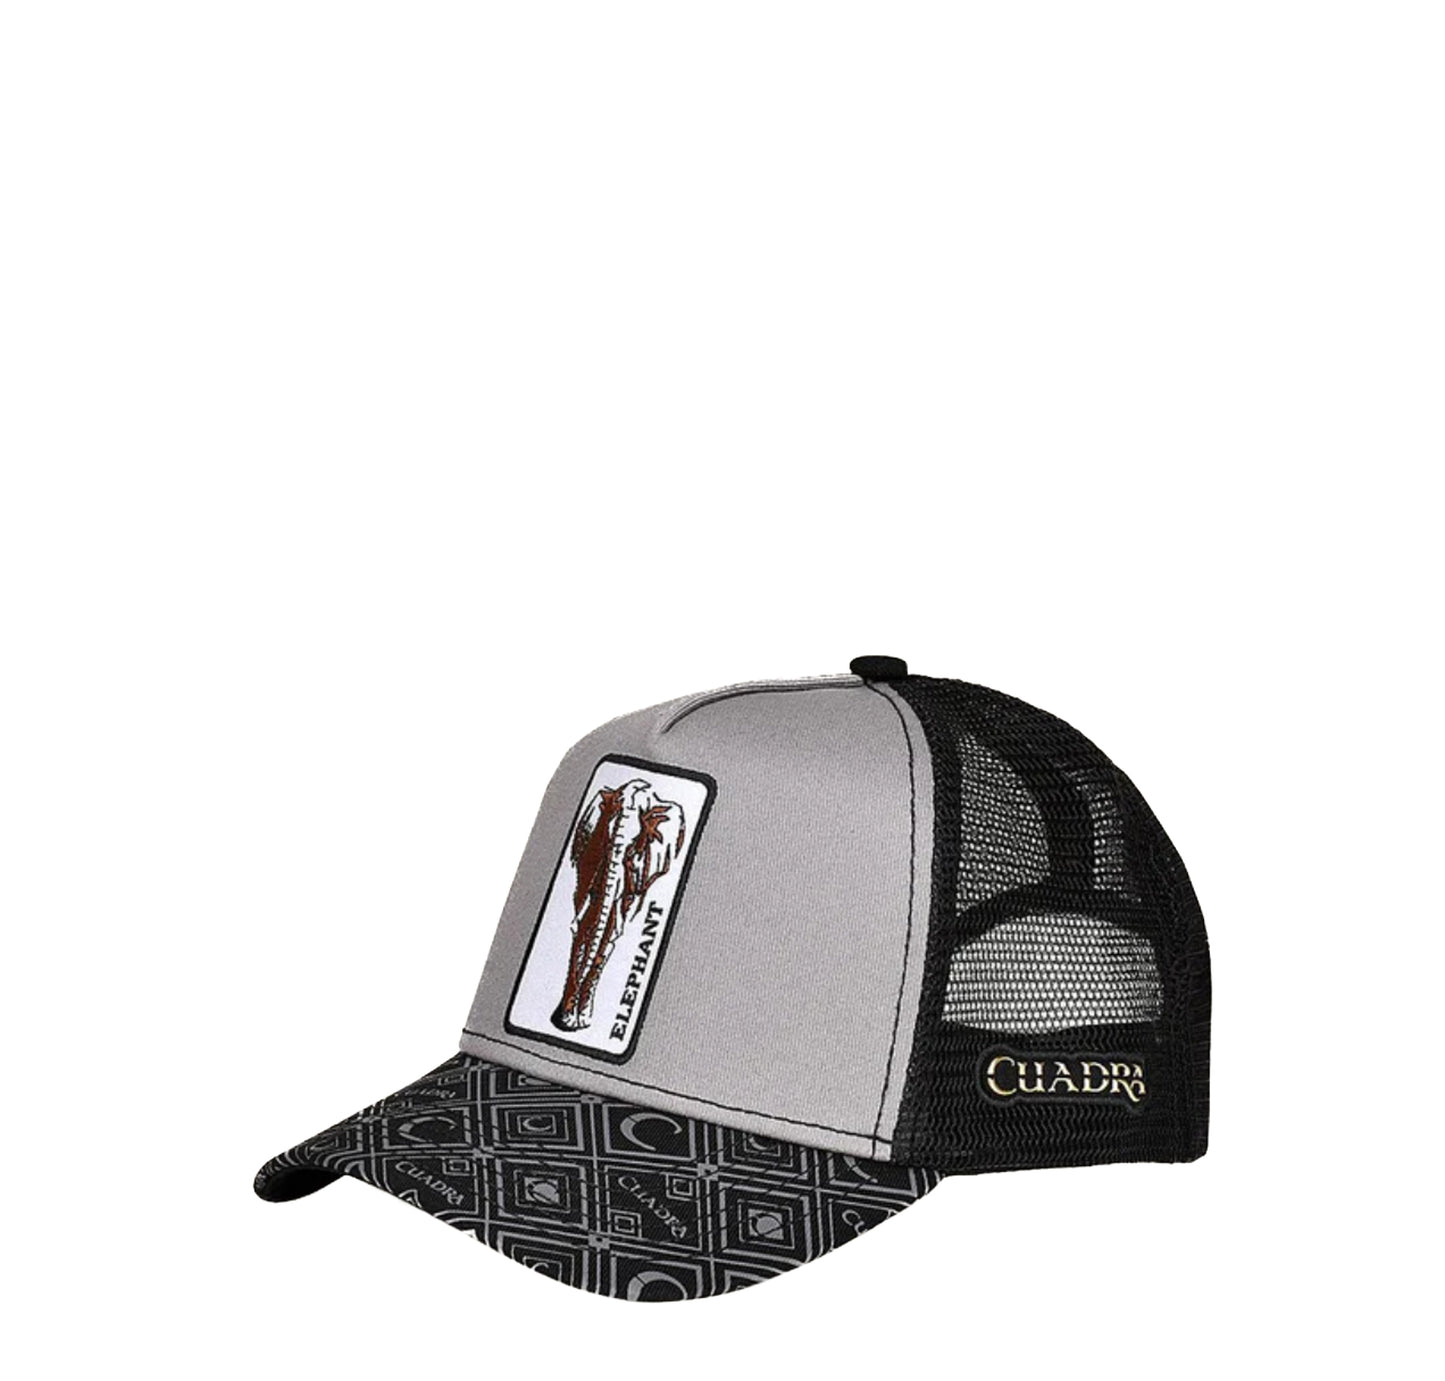 CUADRA Black Cap with Embroidery Elephant Patch